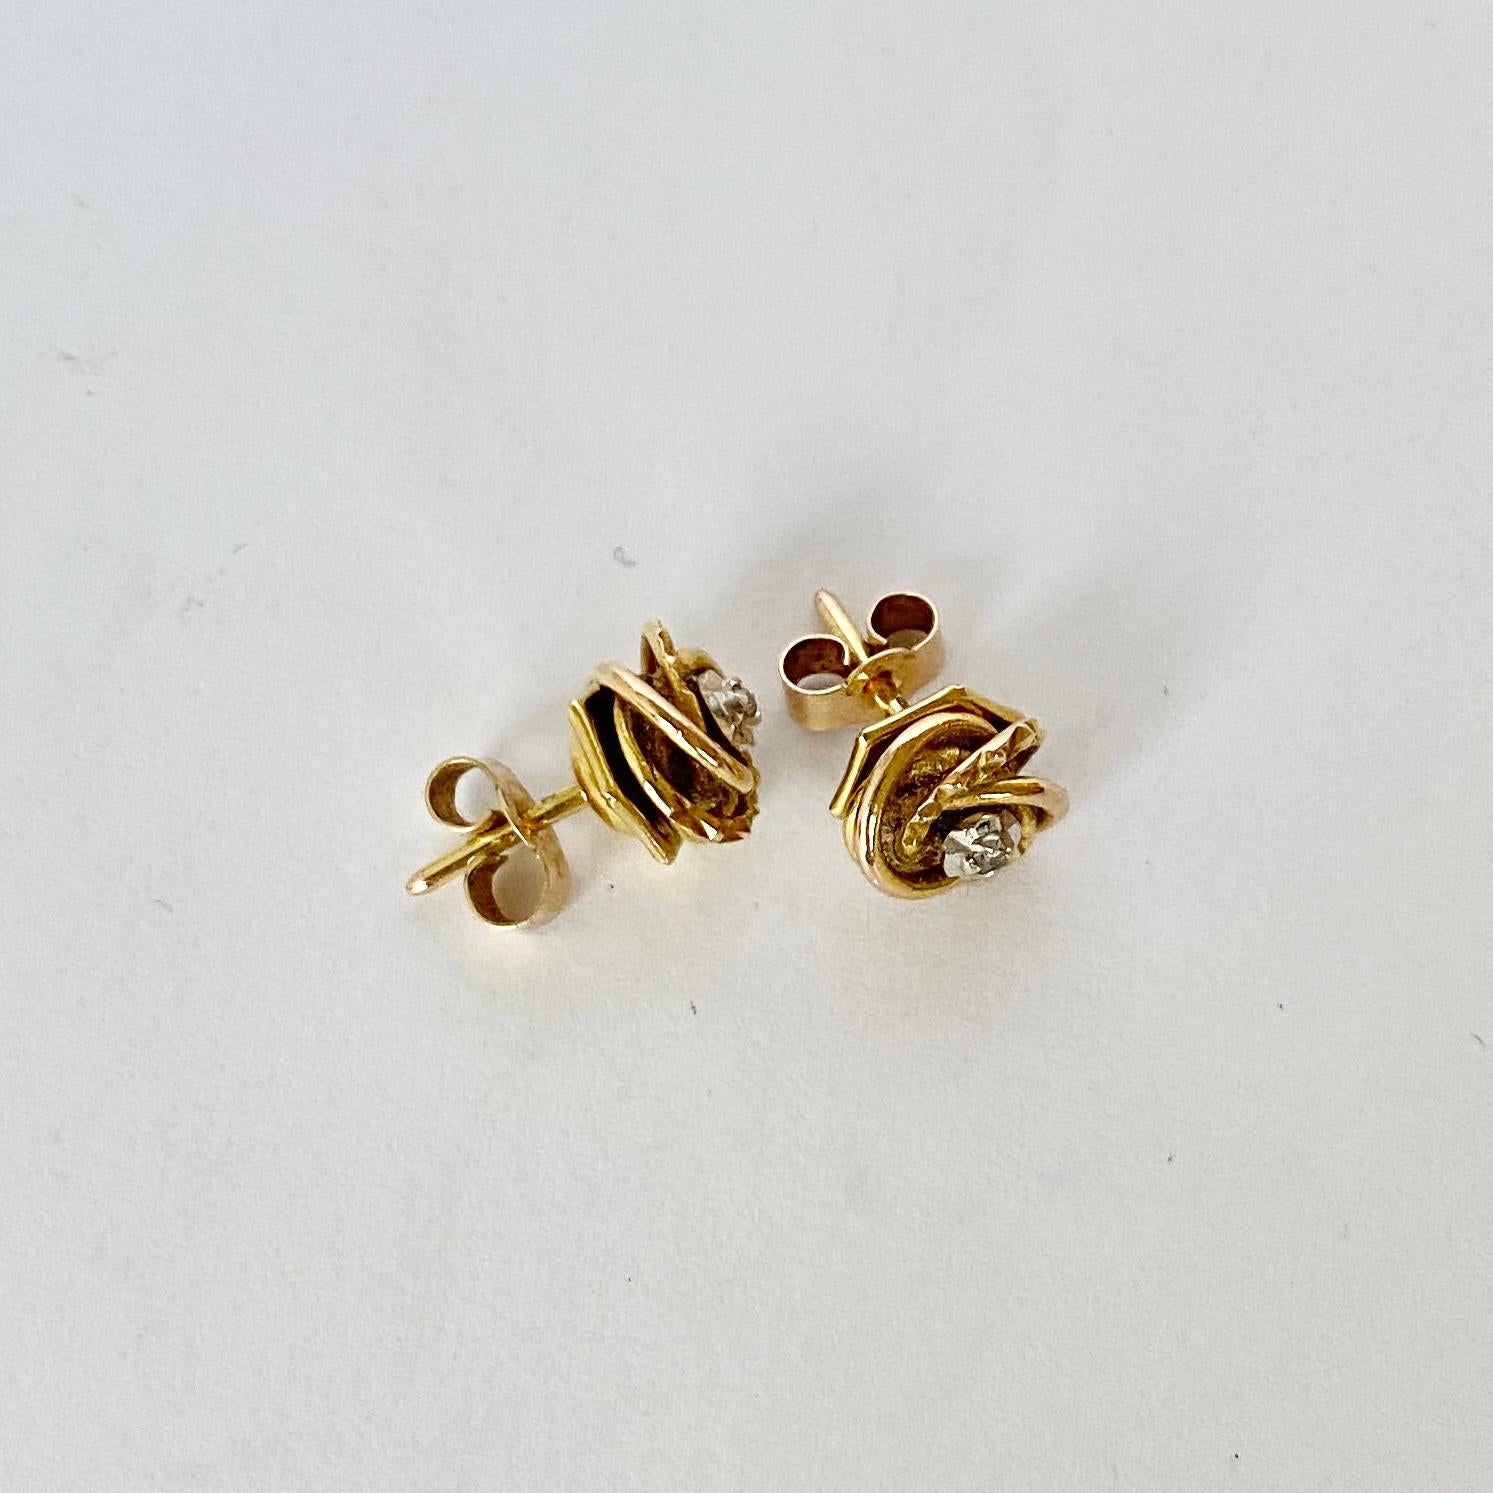 Glossy 9ct yellow gold superbly tied in a knot make the most stylish design for these earrings. At the centre of the knot is a diamond point set in an illusion setting. 

Knot Diameter: 8mm

Weight: 1.67g